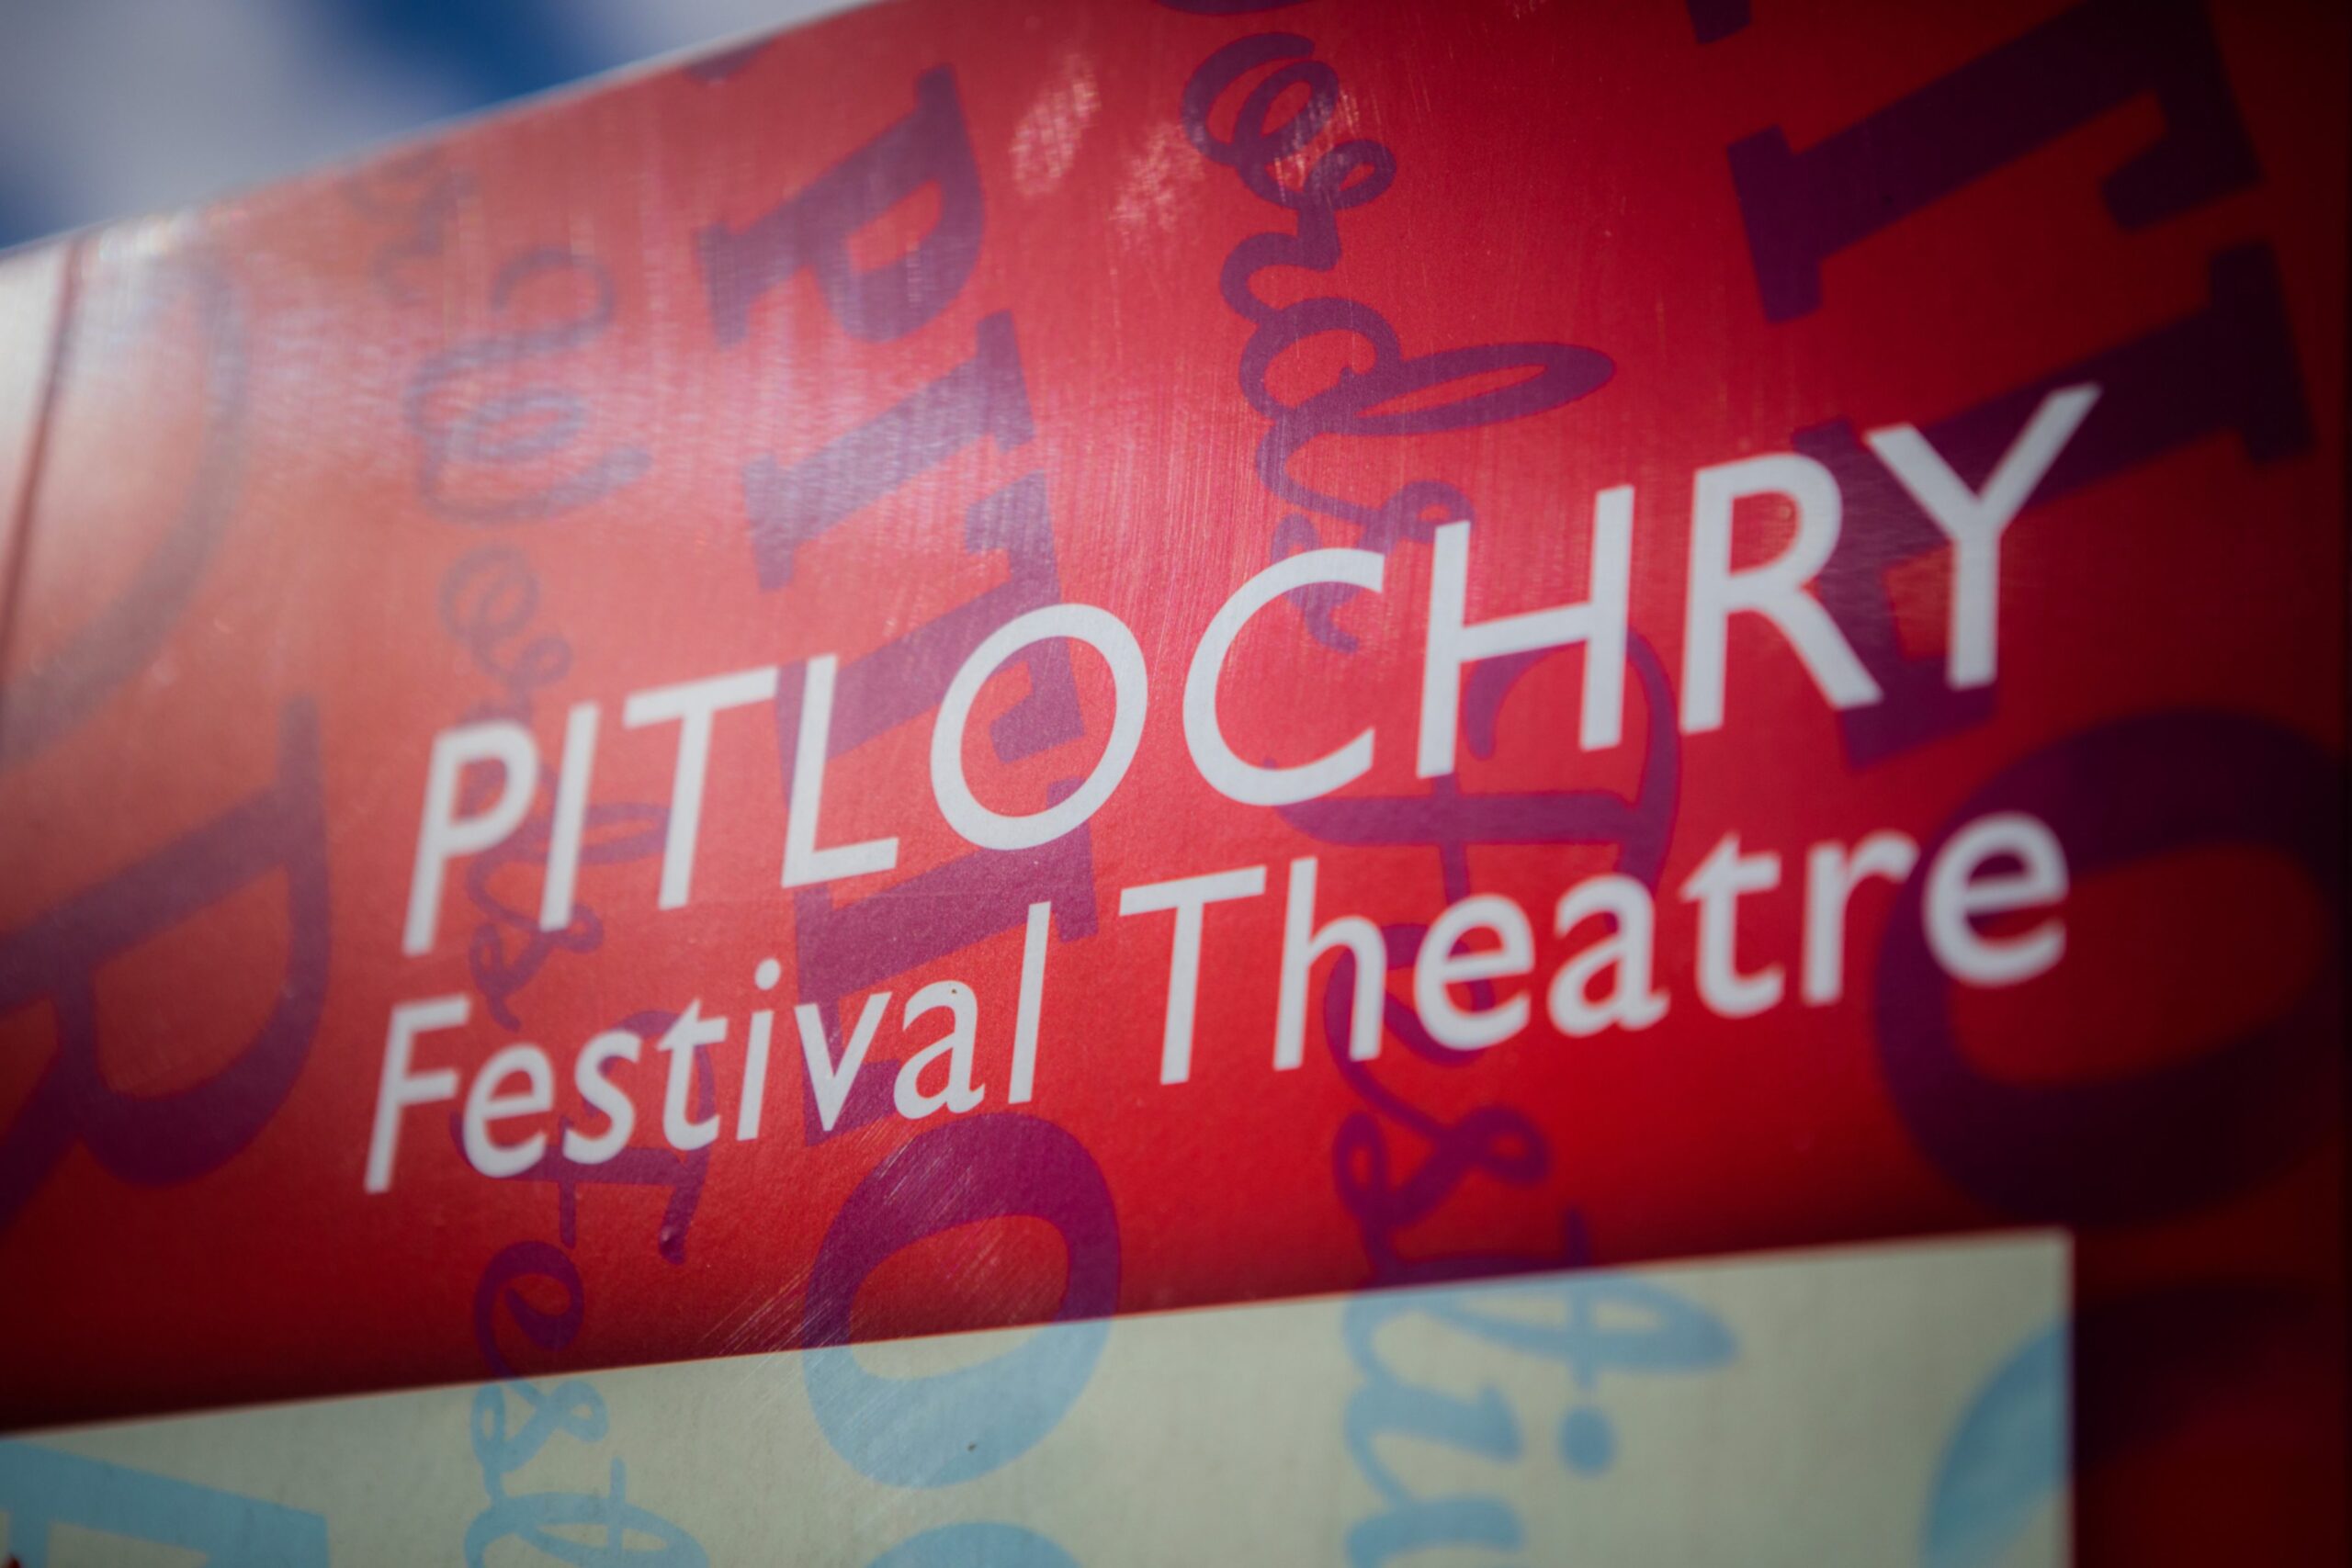 Pitlochry Festival Theatre sign.